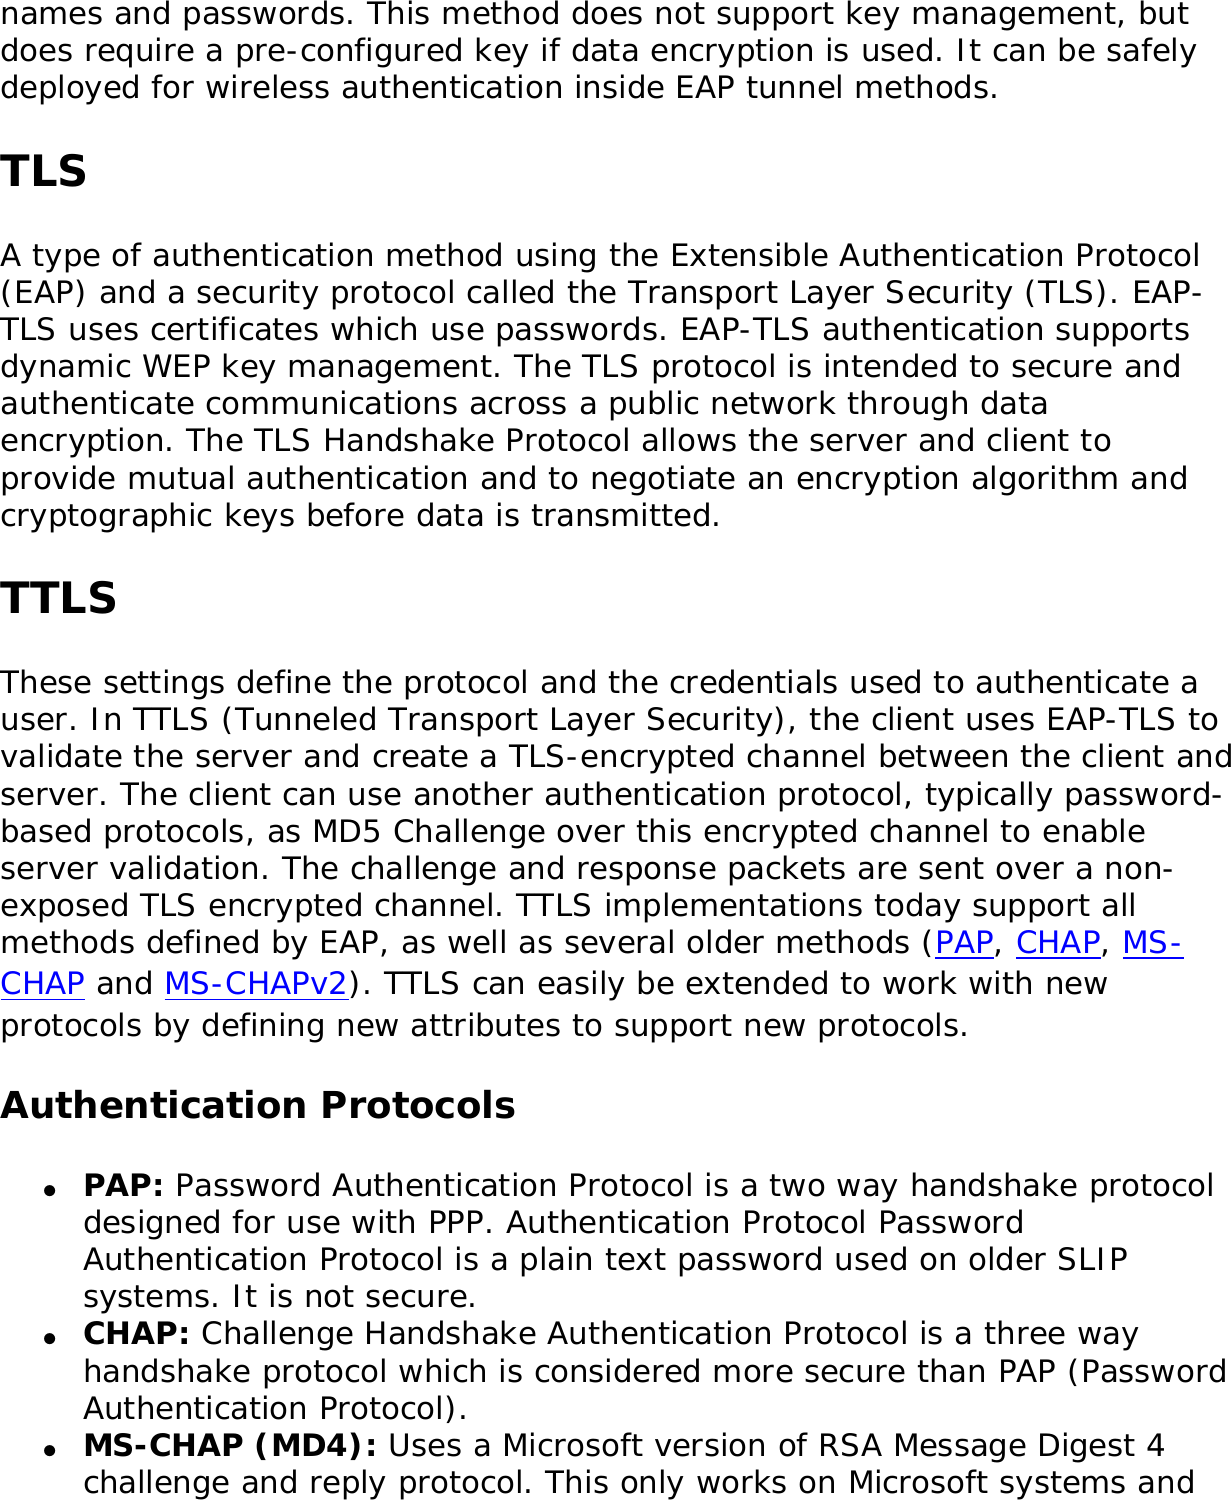 names and passwords. This method does not support key management, but does require a pre-configured key if data encryption is used. It can be safely deployed for wireless authentication inside EAP tunnel methods.TLSA type of authentication method using the Extensible Authentication Protocol (EAP) and a security protocol called the Transport Layer Security (TLS). EAP-TLS uses certificates which use passwords. EAP-TLS authentication supports dynamic WEP key management. The TLS protocol is intended to secure and authenticate communications across a public network through data encryption. The TLS Handshake Protocol allows the server and client to provide mutual authentication and to negotiate an encryption algorithm and cryptographic keys before data is transmitted. TTLSThese settings define the protocol and the credentials used to authenticate a user. In TTLS (Tunneled Transport Layer Security), the client uses EAP-TLS to validate the server and create a TLS-encrypted channel between the client and server. The client can use another authentication protocol, typically password-based protocols, as MD5 Challenge over this encrypted channel to enable server validation. The challenge and response packets are sent over a non-exposed TLS encrypted channel. TTLS implementations today support all methods defined by EAP, as well as several older methods (PAP, CHAP, MS-CHAP and MS-CHAPv2). TTLS can easily be extended to work with new protocols by defining new attributes to support new protocols. Authentication Protocols●     PAP: Password Authentication Protocol is a two way handshake protocol designed for use with PPP. Authentication Protocol Password Authentication Protocol is a plain text password used on older SLIP systems. It is not secure. ●     CHAP: Challenge Handshake Authentication Protocol is a three way handshake protocol which is considered more secure than PAP (Password Authentication Protocol). ●     MS-CHAP (MD4): Uses a Microsoft version of RSA Message Digest 4 challenge and reply protocol. This only works on Microsoft systems and 